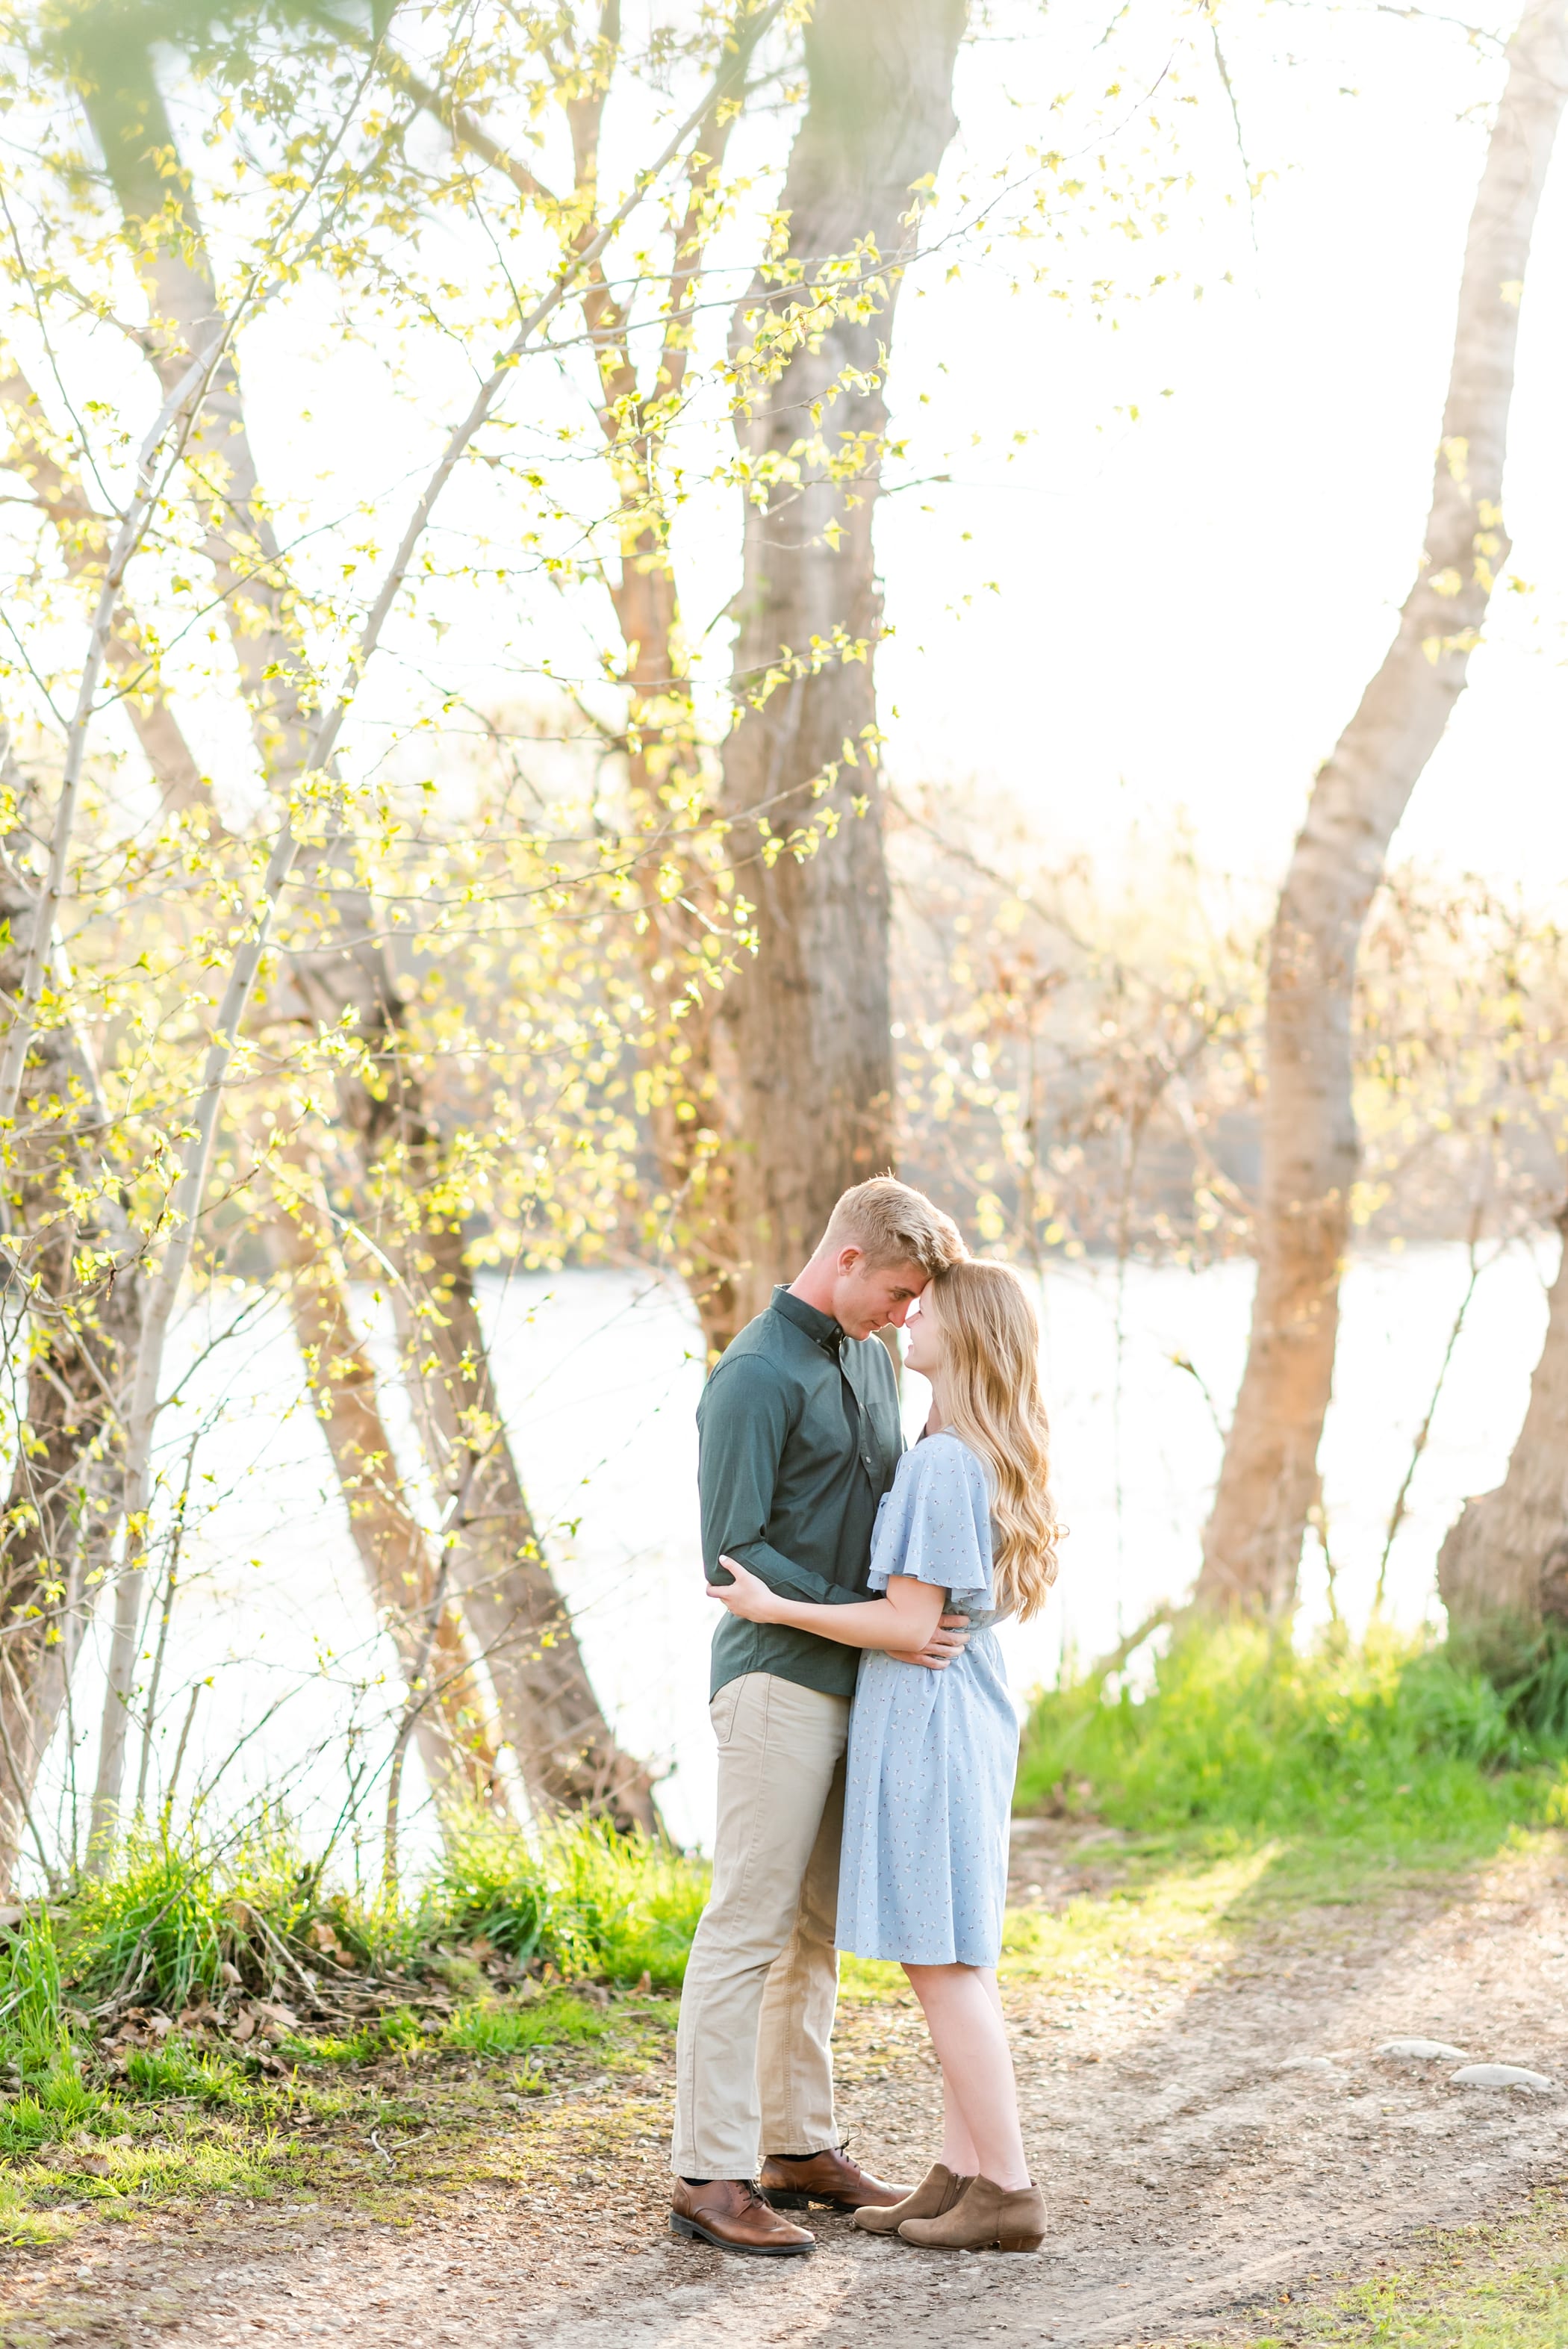 Glowy spring engagements at the Boise greenbelt